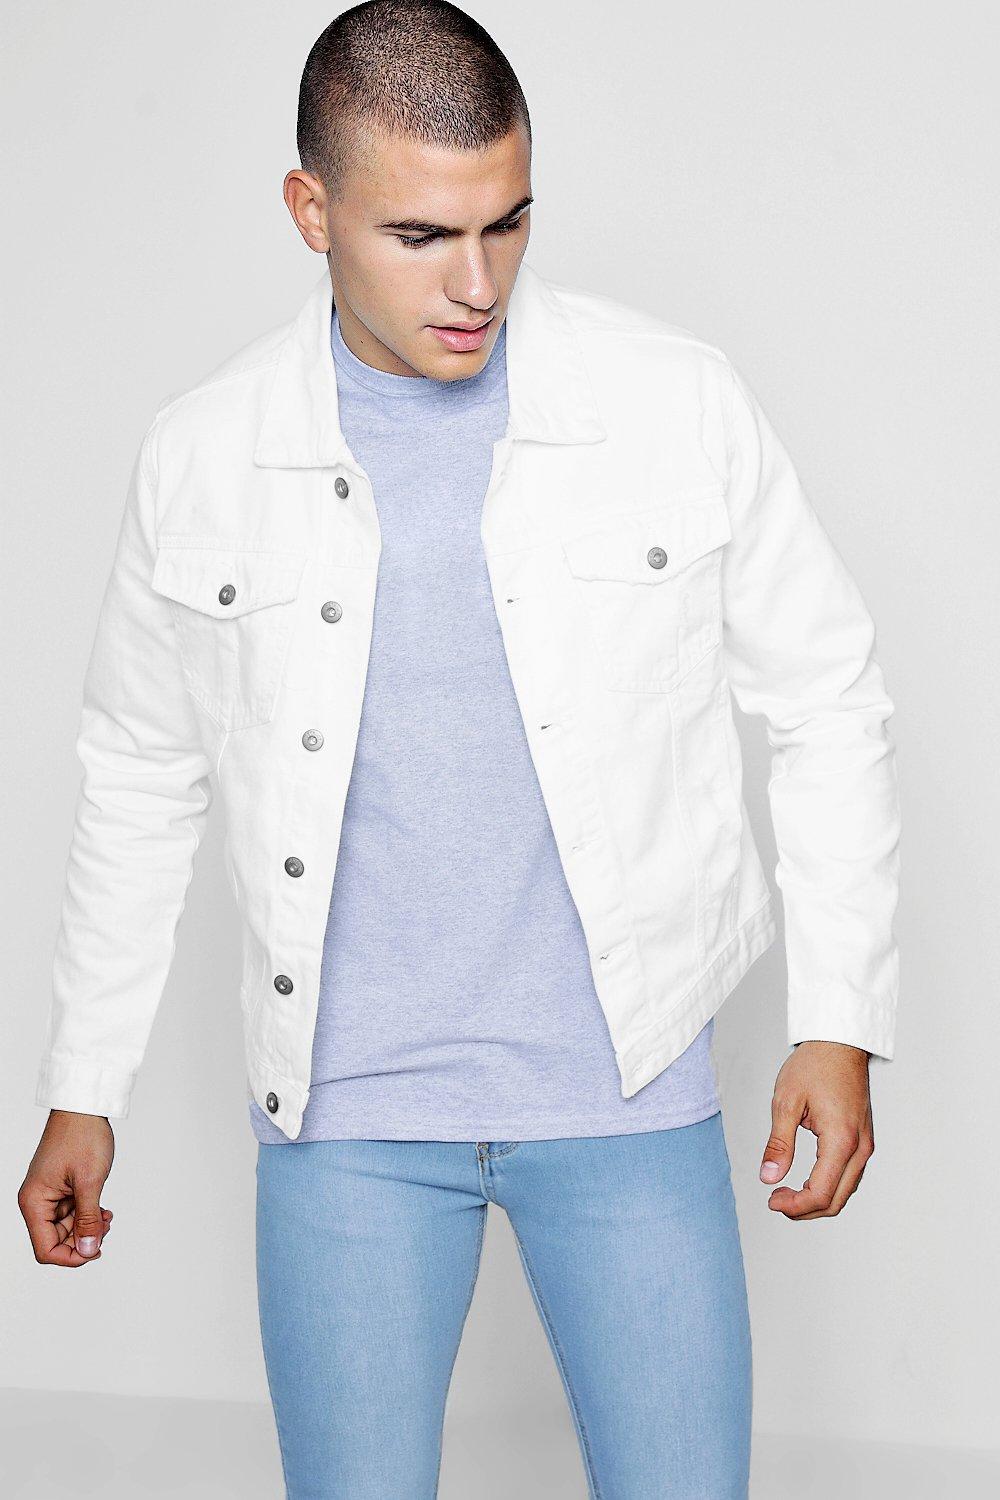 white jean jacket mens outfit